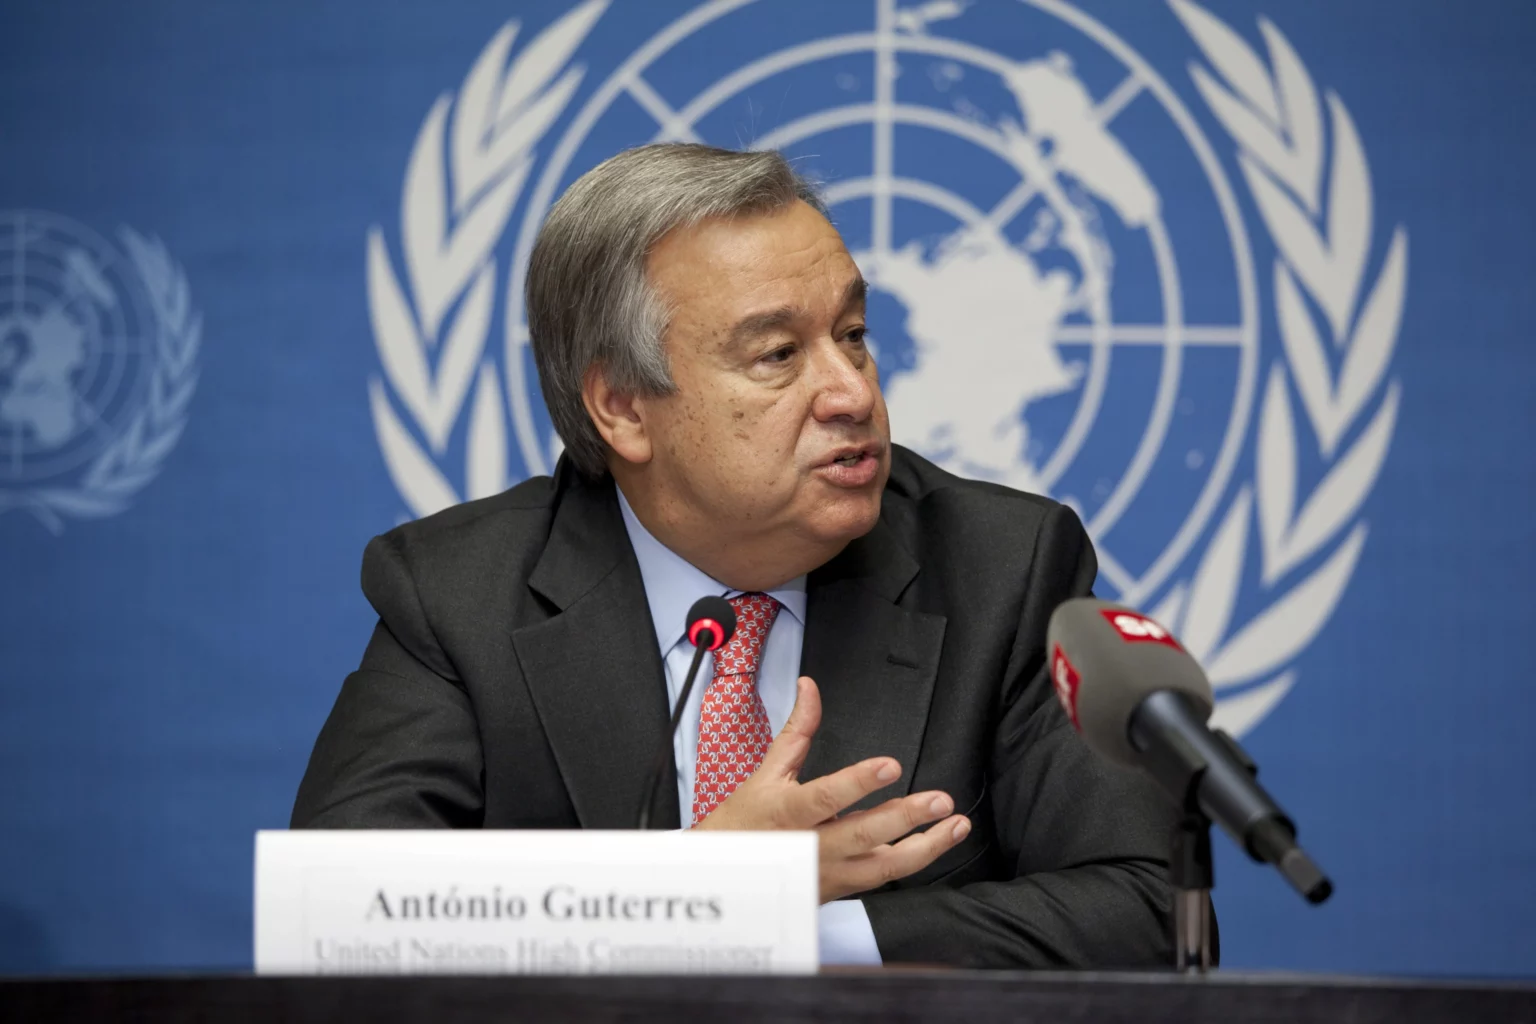 un-chief-antonio-guterres-rings-alarm-bell-on-global-security-threat-from-the-gaza-war